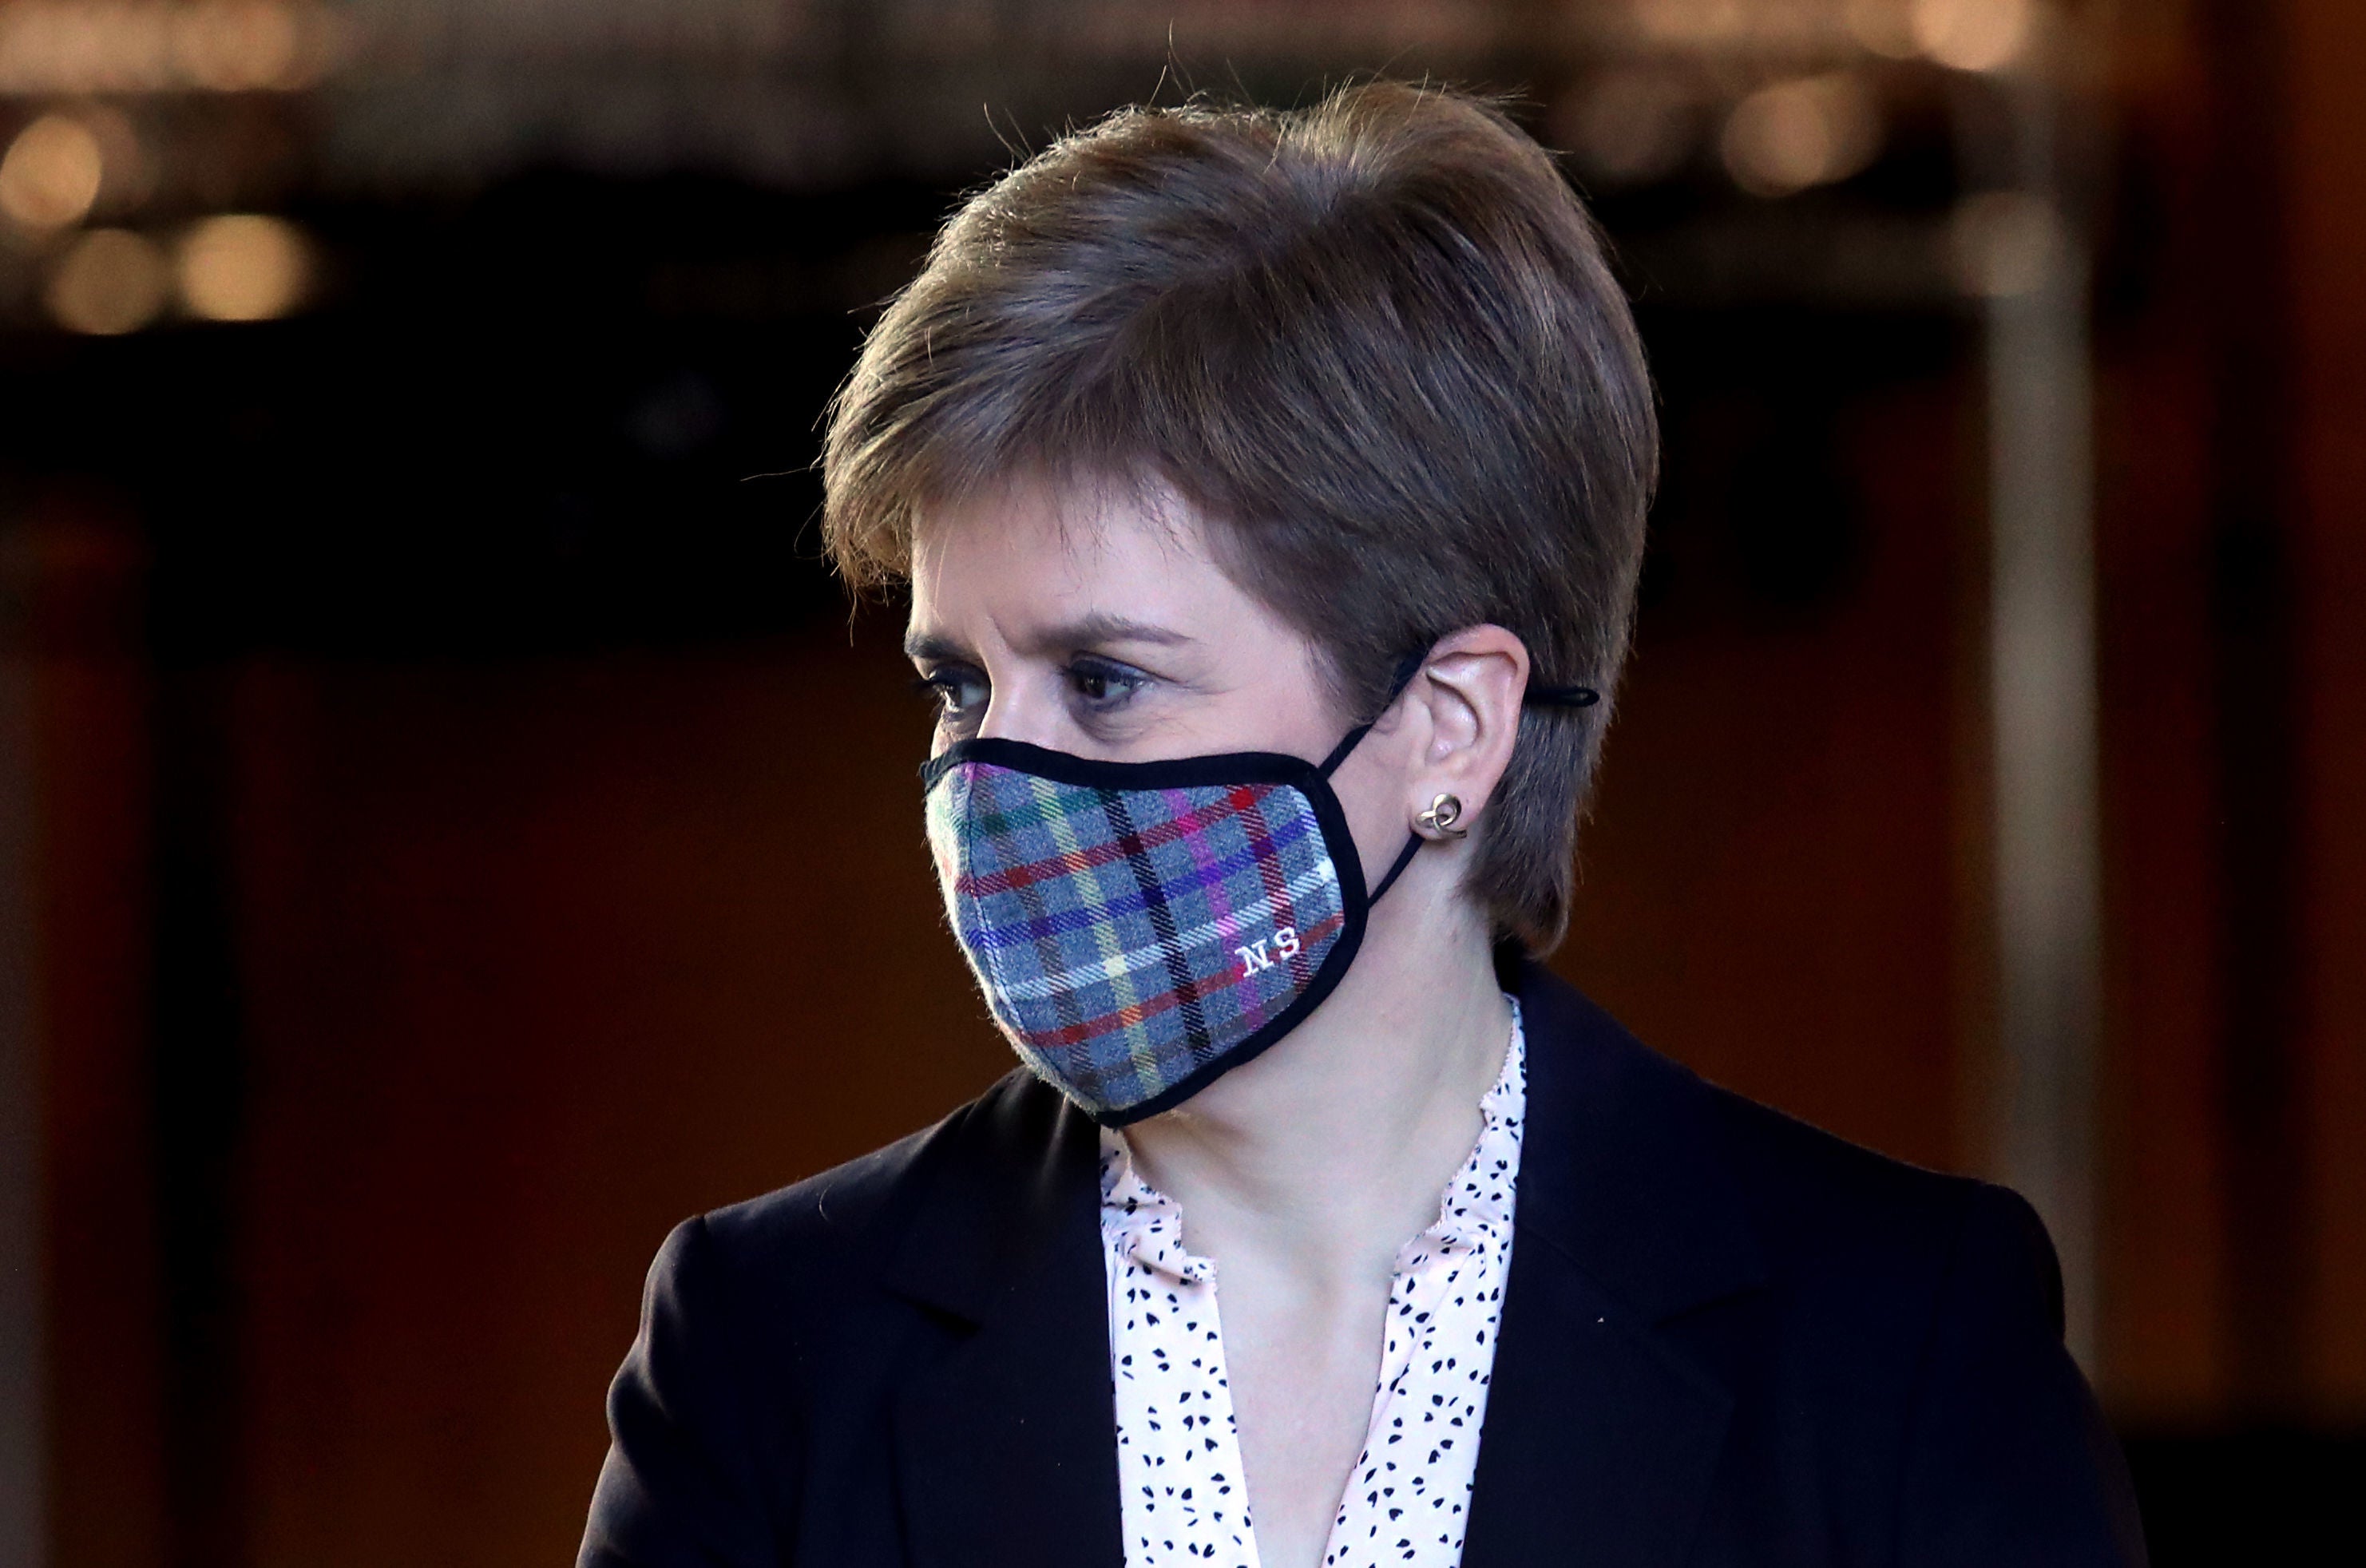 The polls still look good for Sturgeon despite a rift in the party